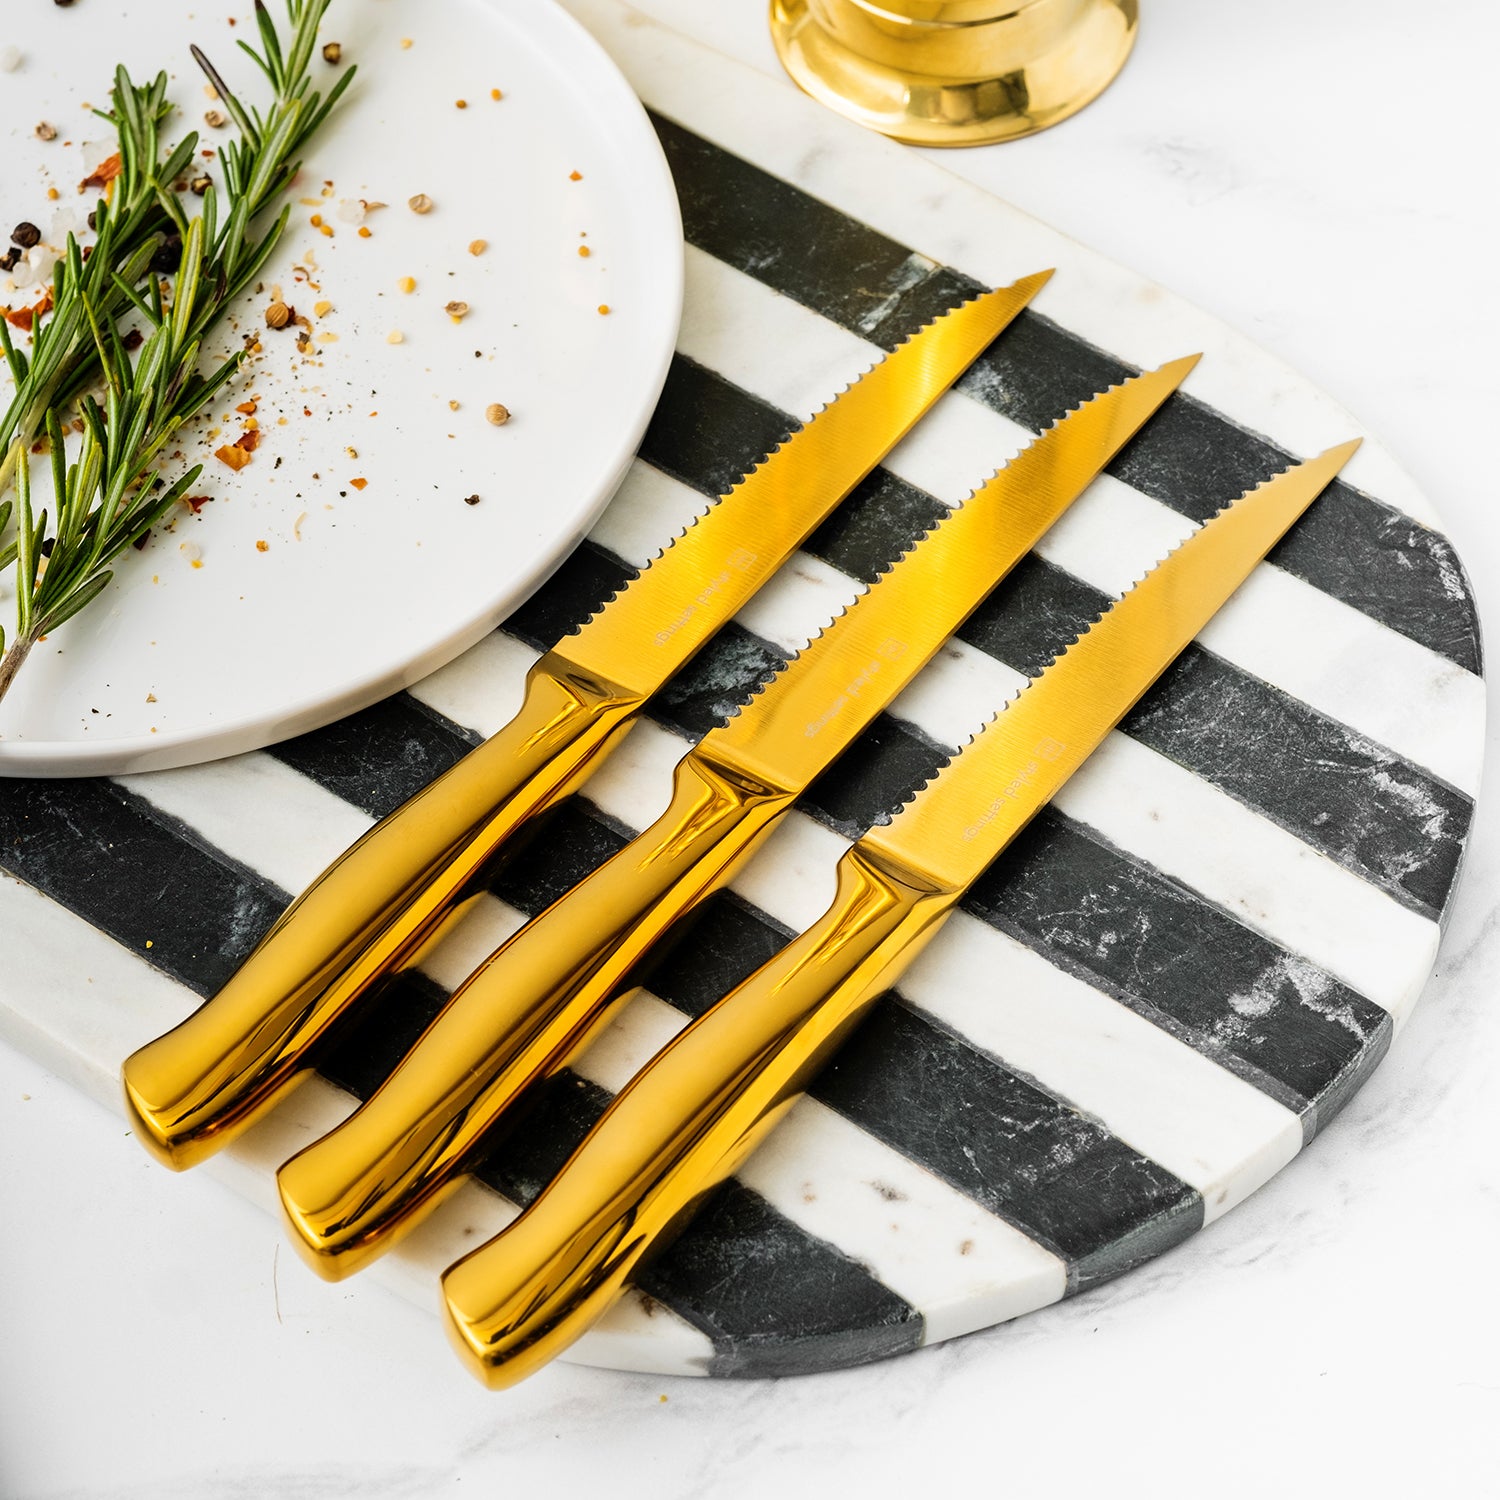 CHROME CLUB Stainless Steel Black and Gold Knife Set with Block - 7 Piece  Gold Kitchen Knife Set with Durable Clear Knife Block and Sharpener 